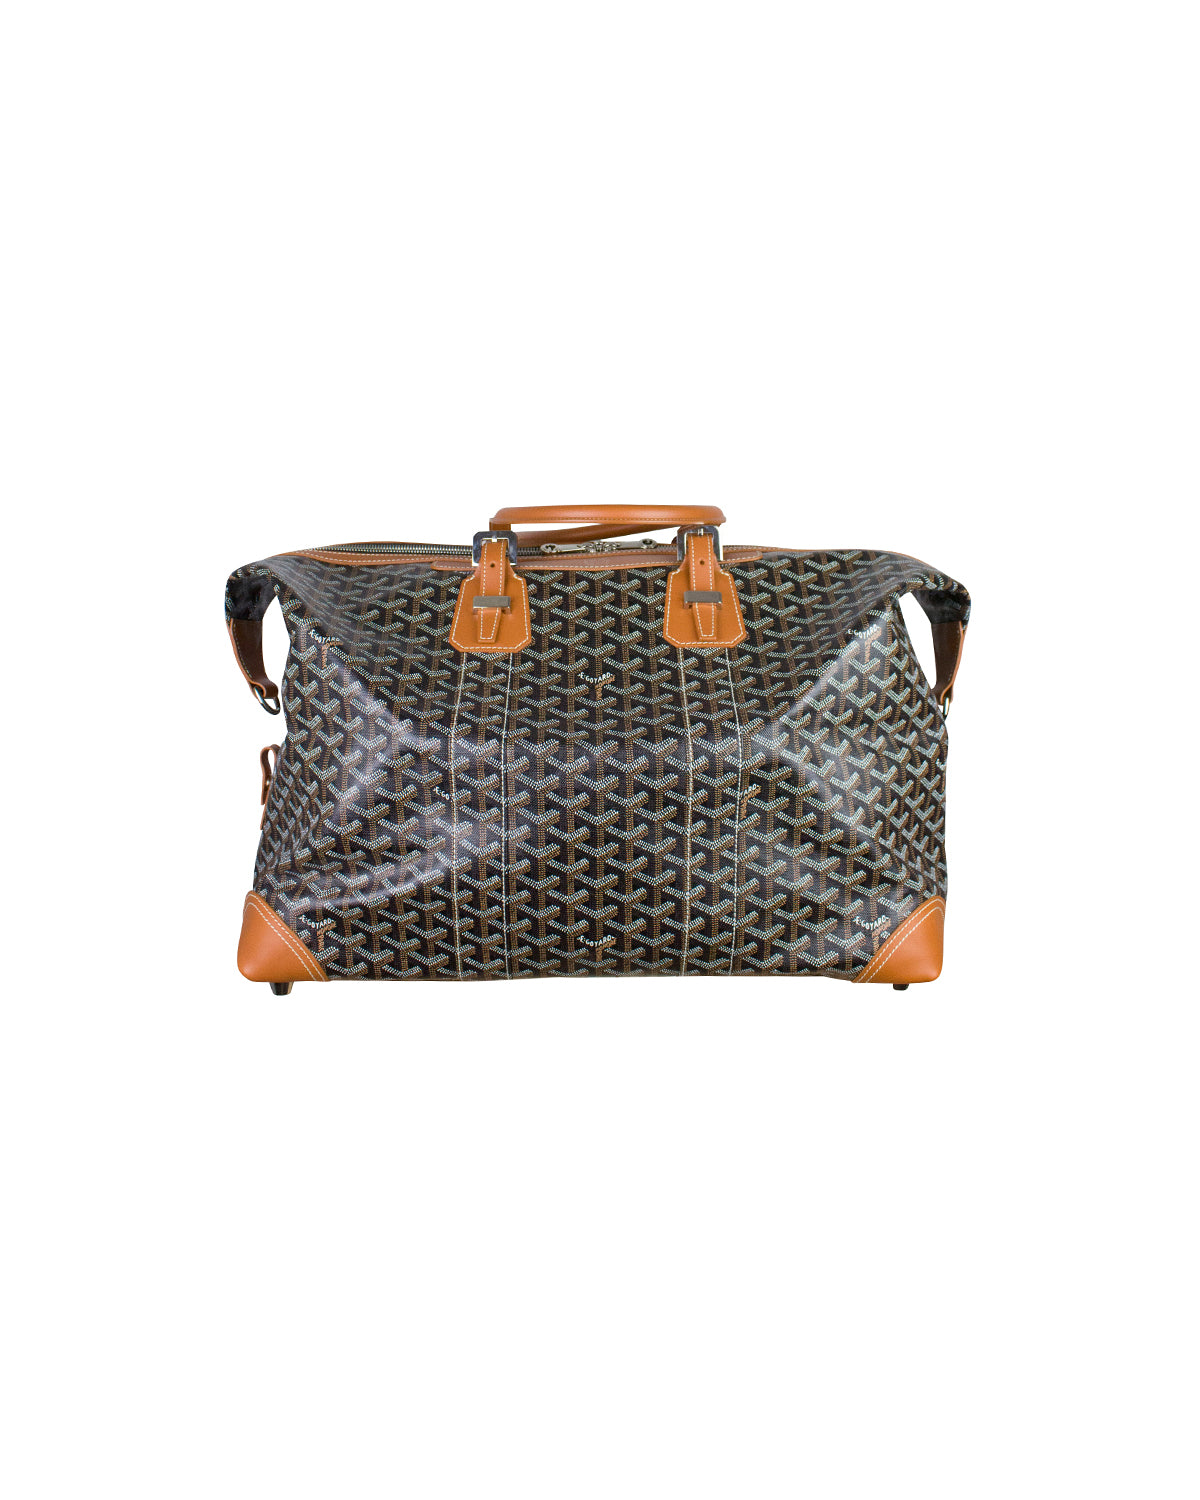 What You Need To Know About Goyard Duffle Bags